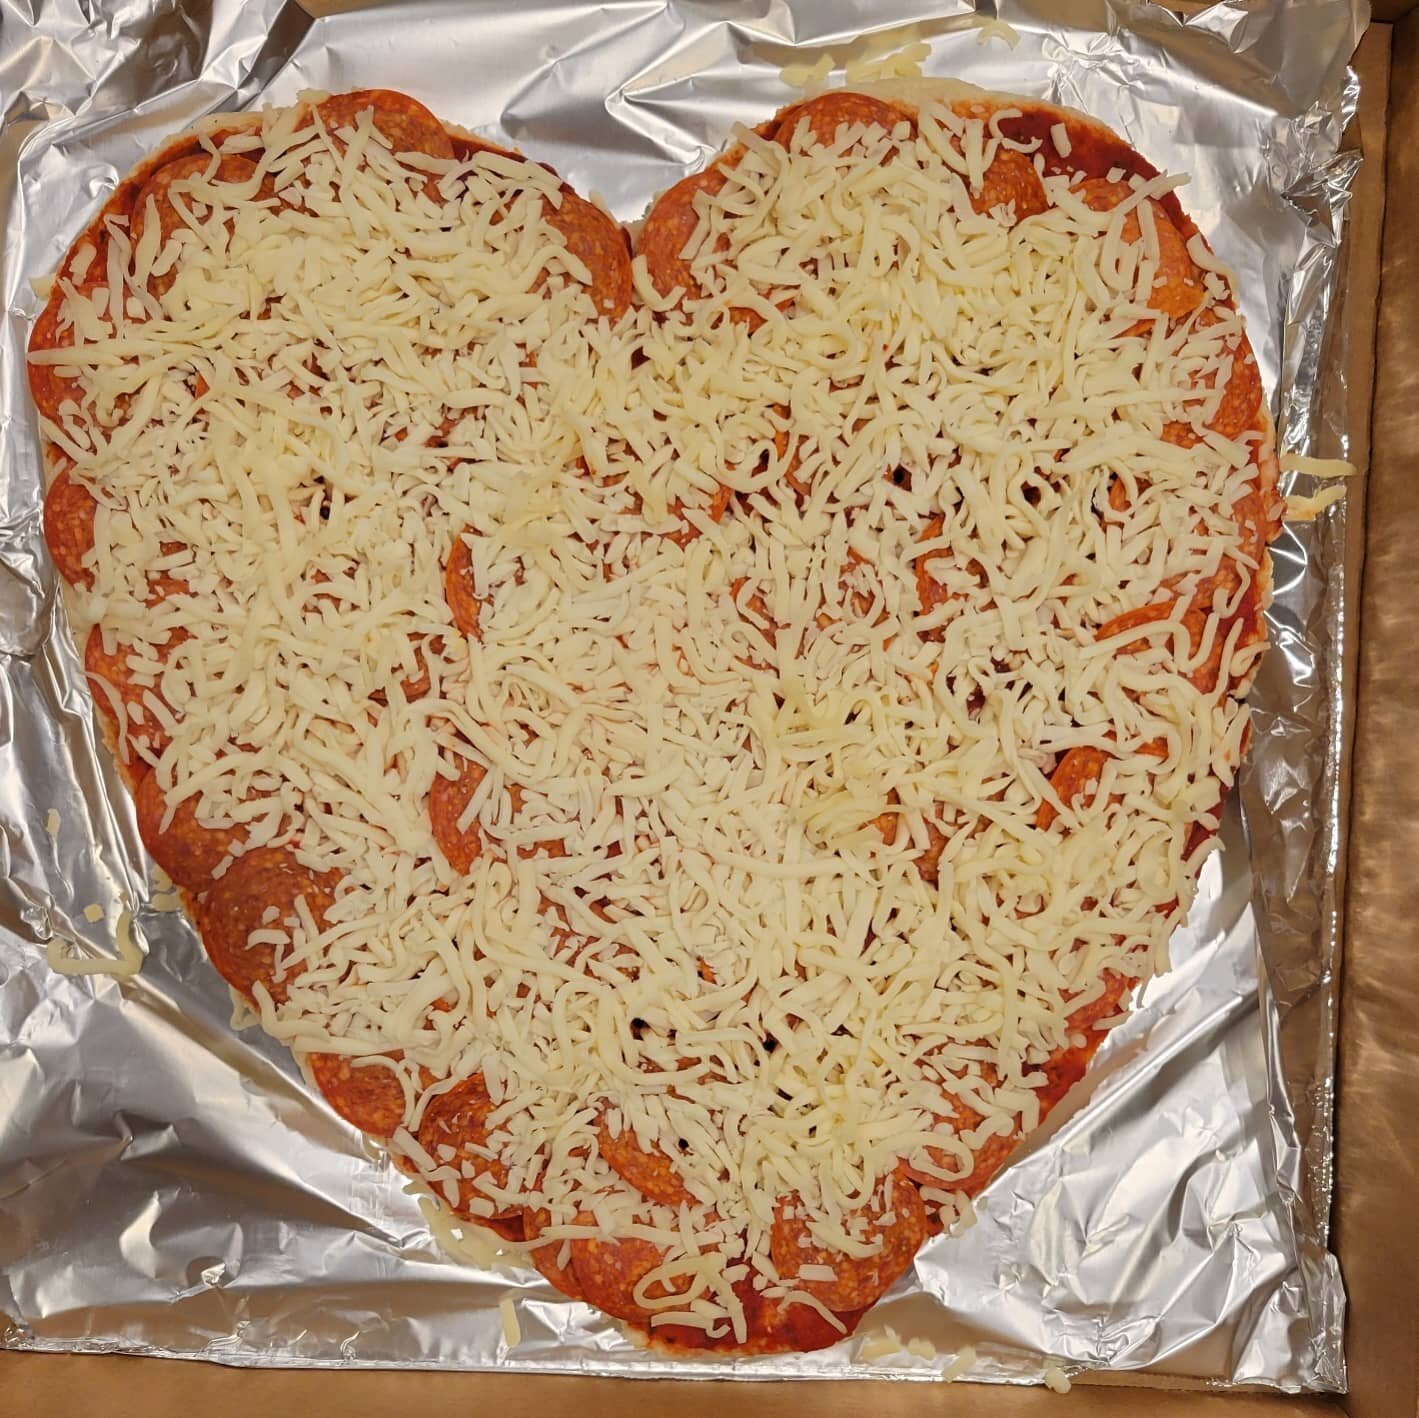 We ❤ this Valentine's Day tradition!

#pizza 
#food 
#delish
#foodstagram
#valentines 
#bemyvalentine
#traditions
#vineyardseeds